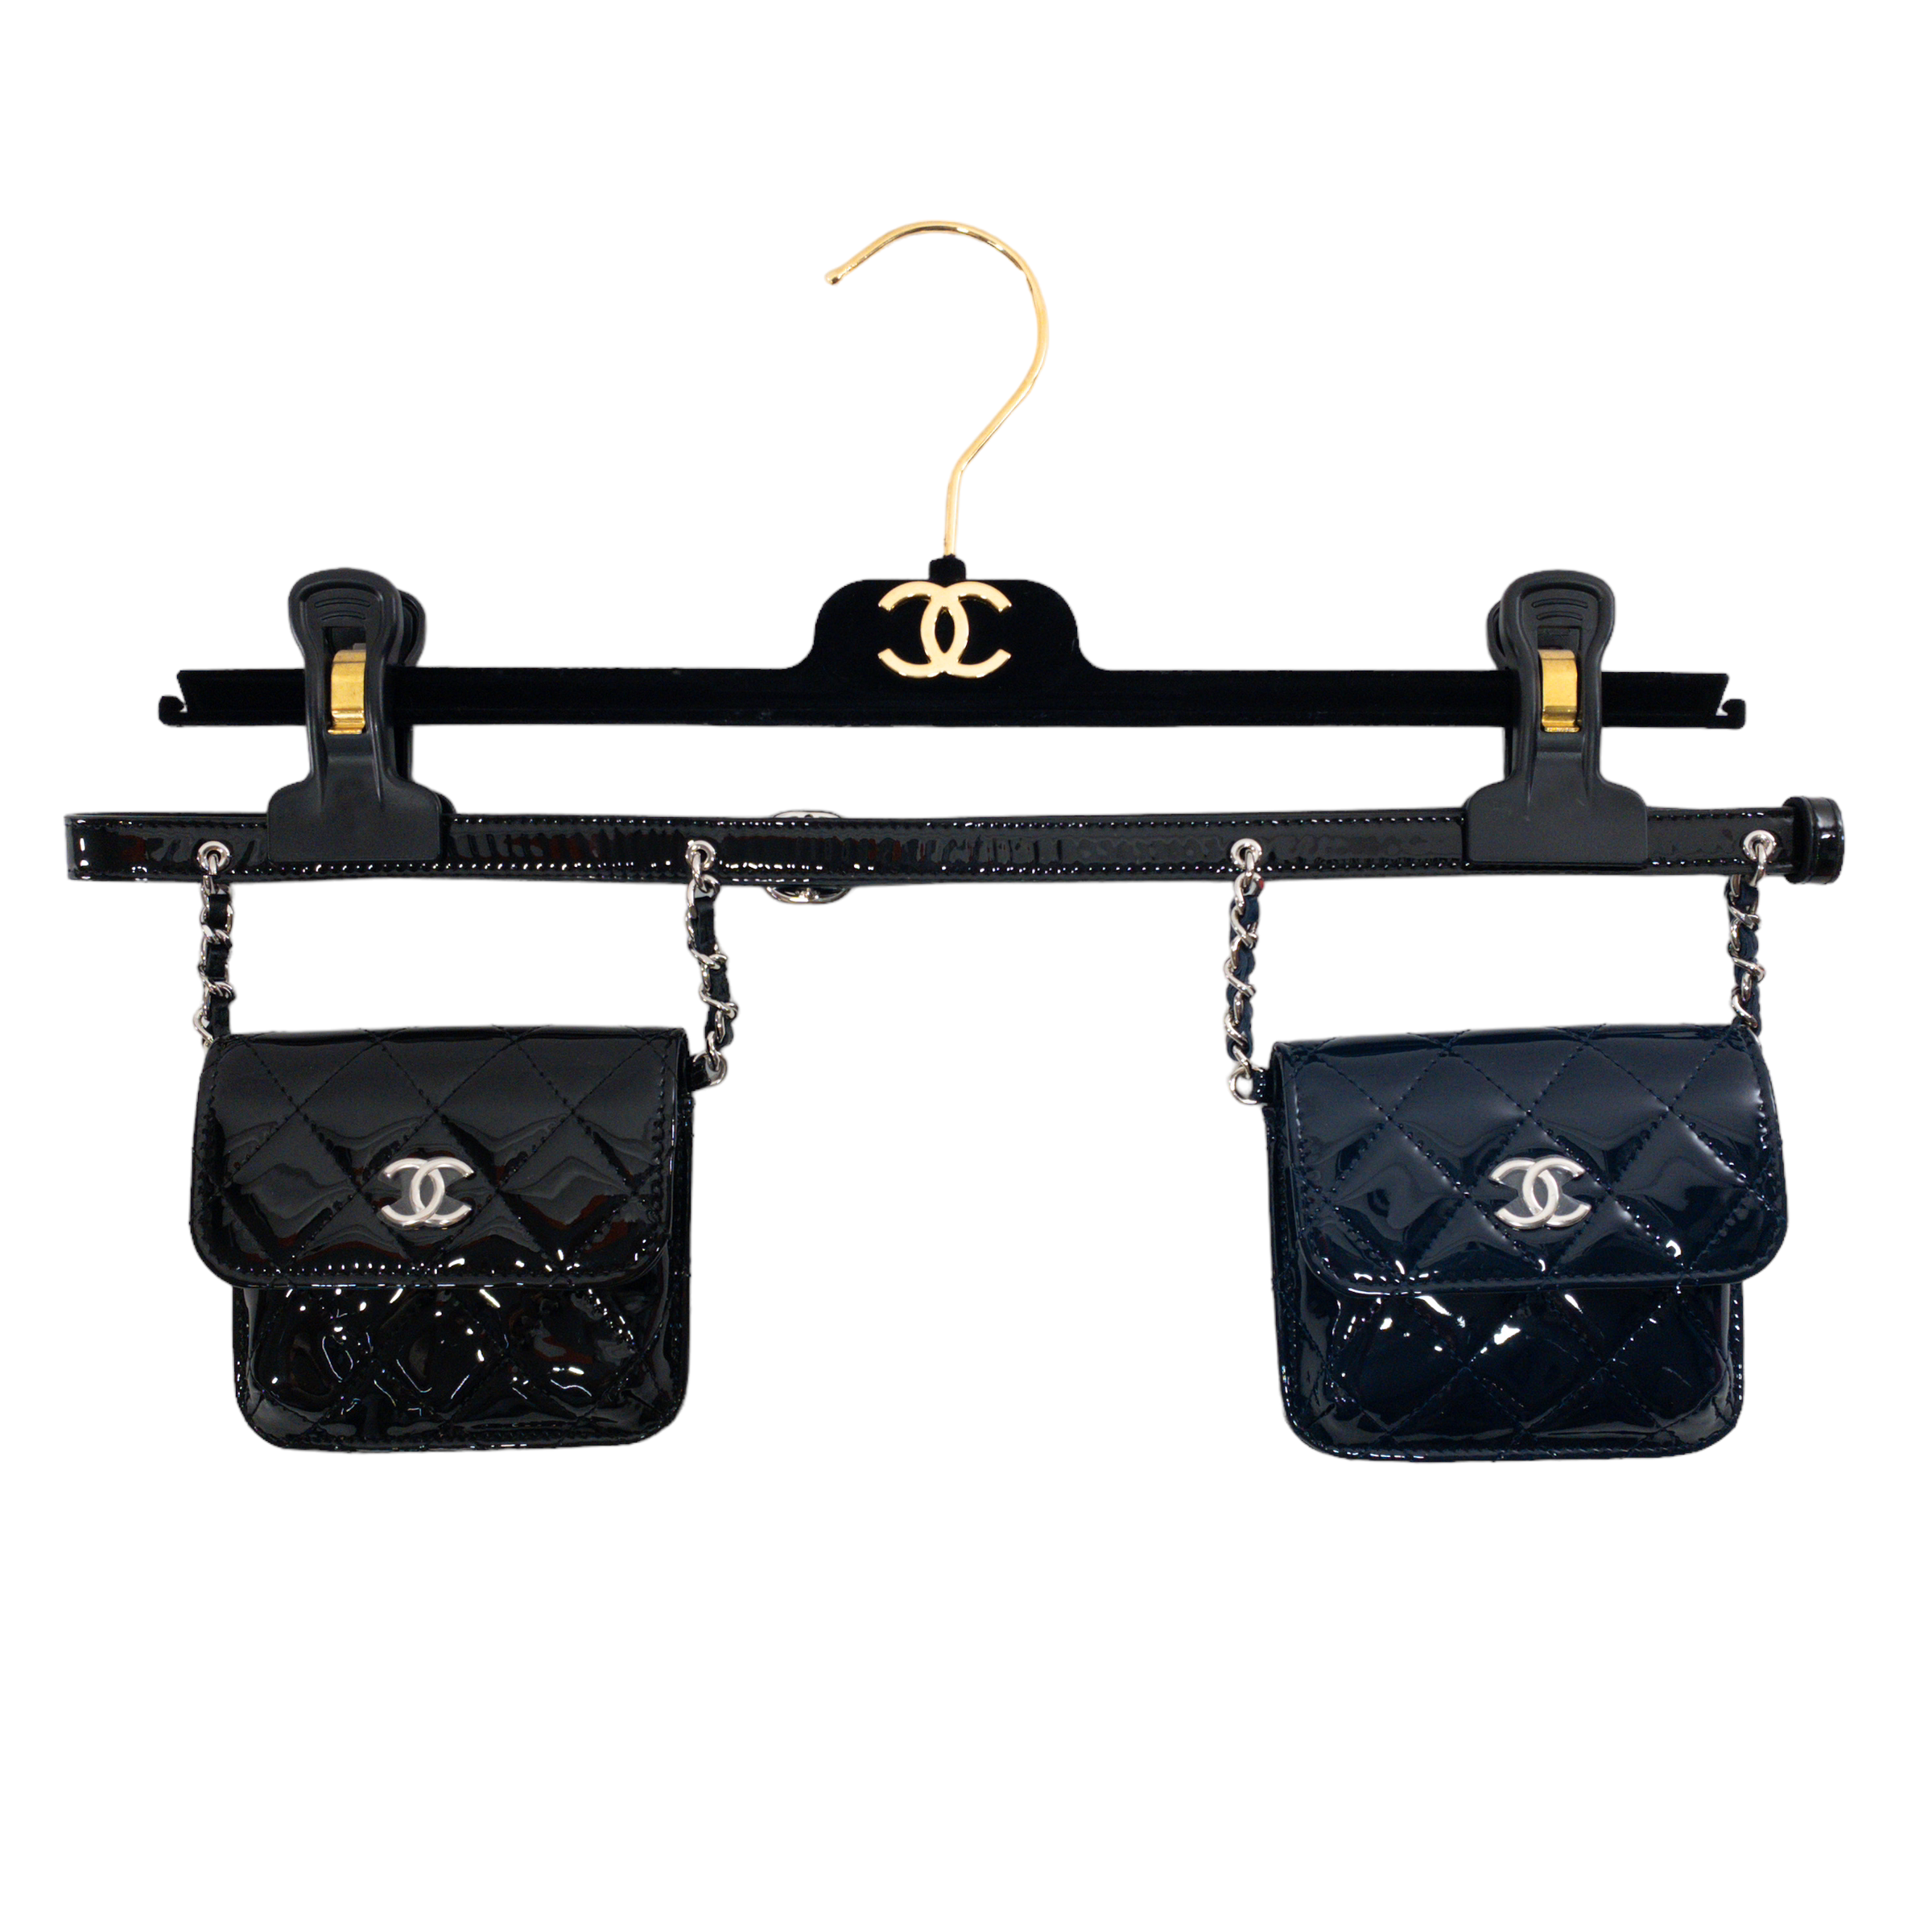 Chanel Cc Logo Belt with Quilted Patent Leather , Women's Fashion